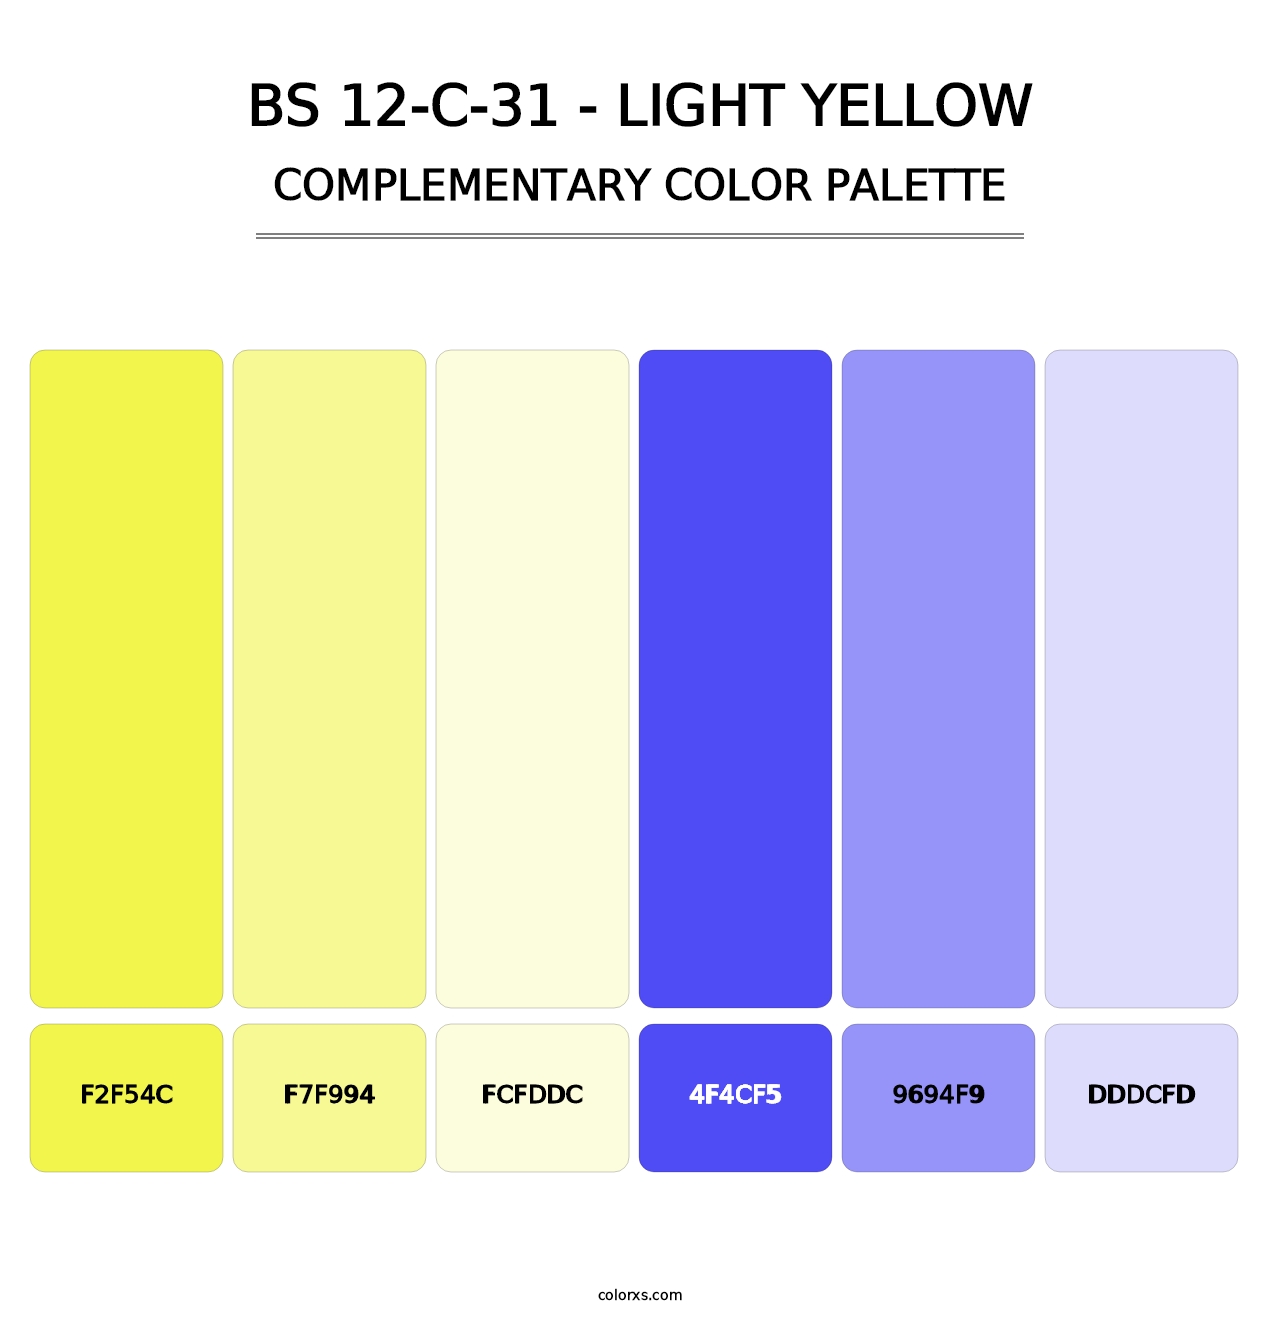 BS 12-C-31 - Light Yellow - Complementary Color Palette